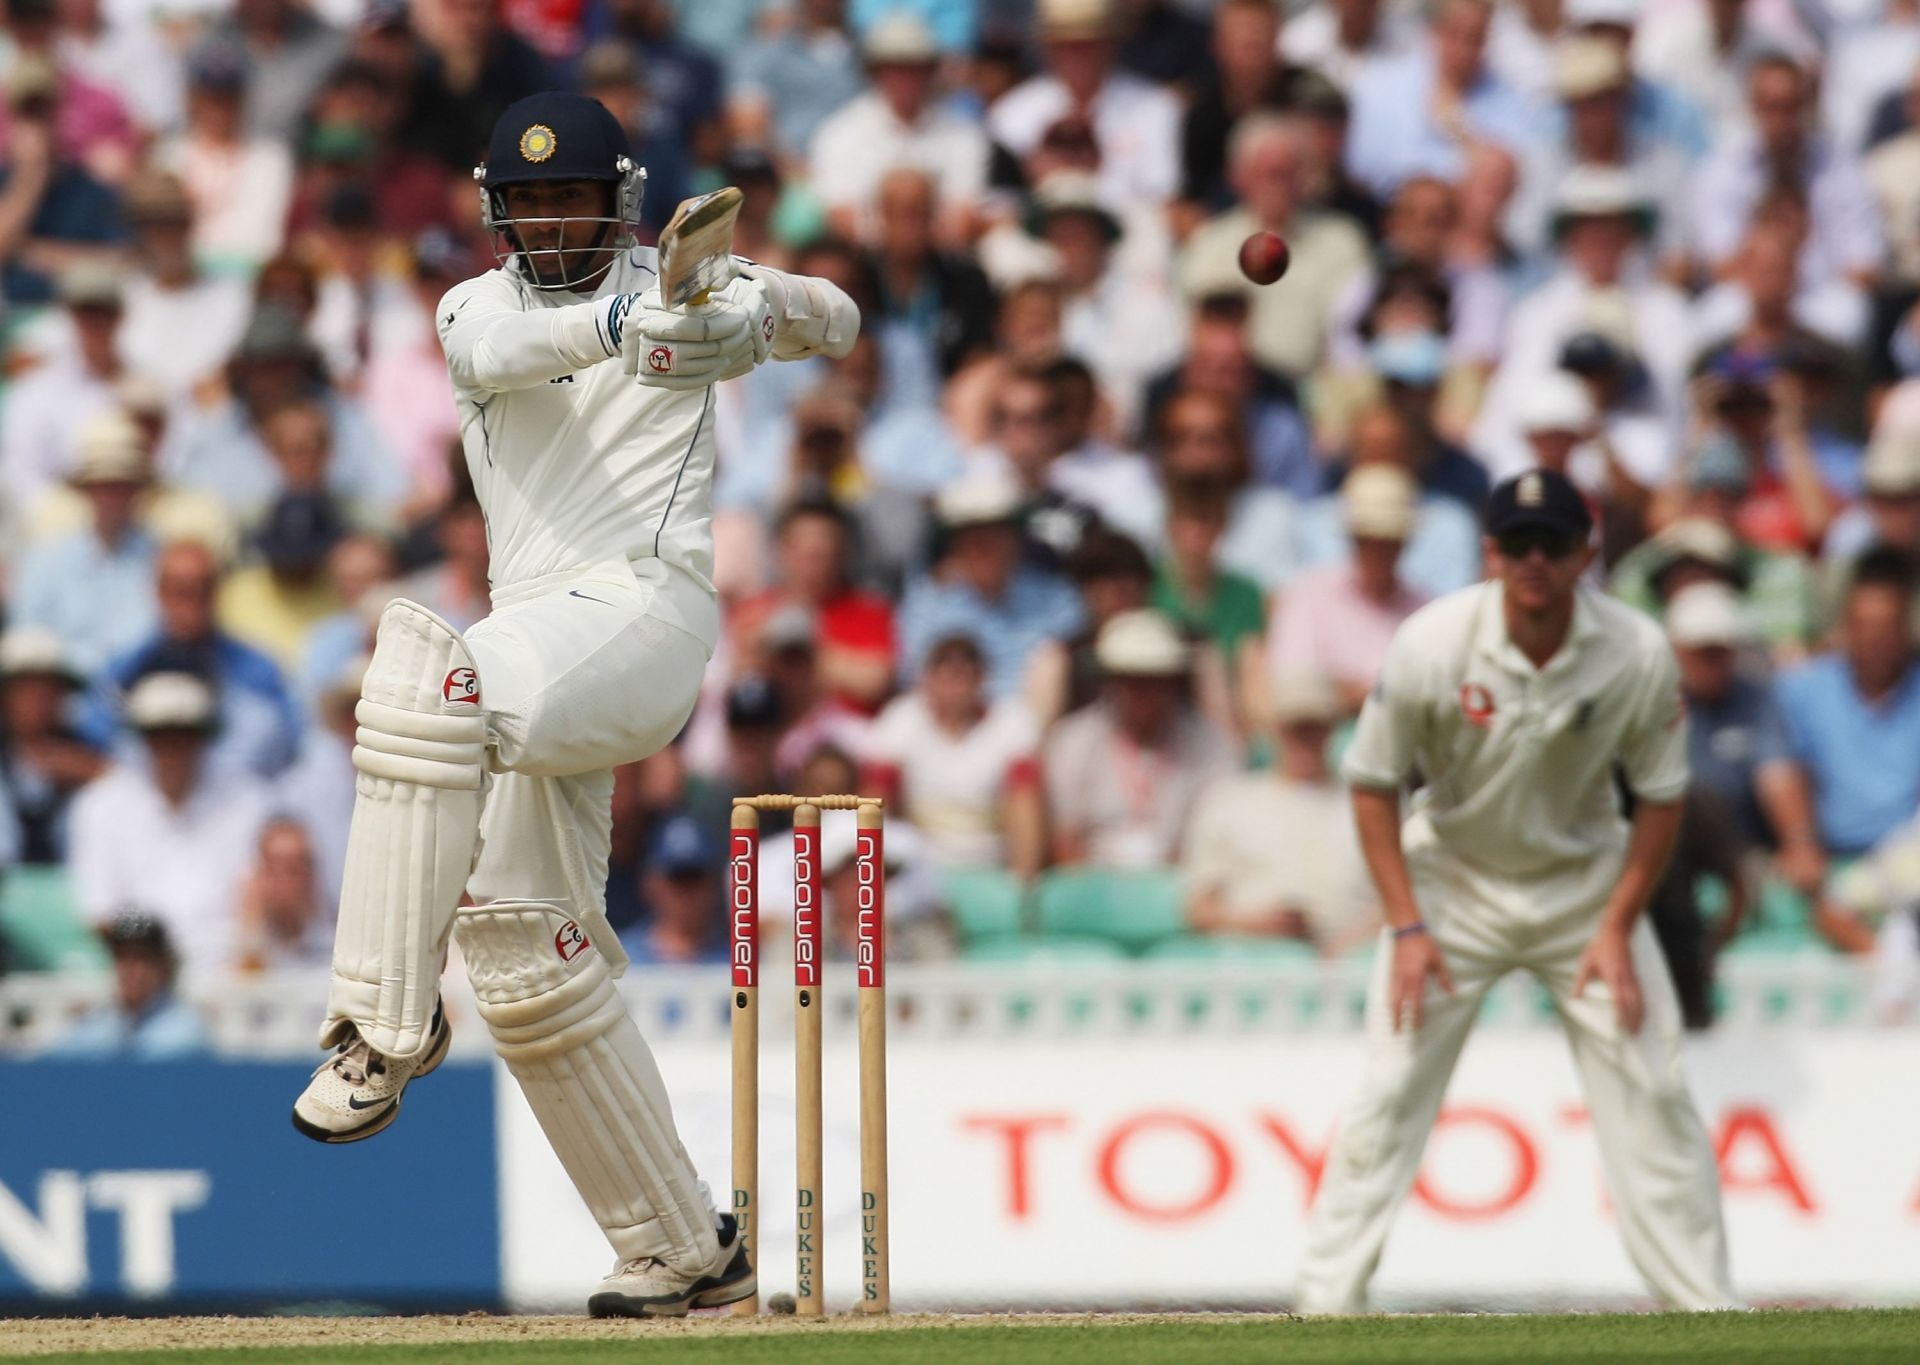 Dinesh Karthik batting during The Oval Test in 2007. Pic: Getty Images